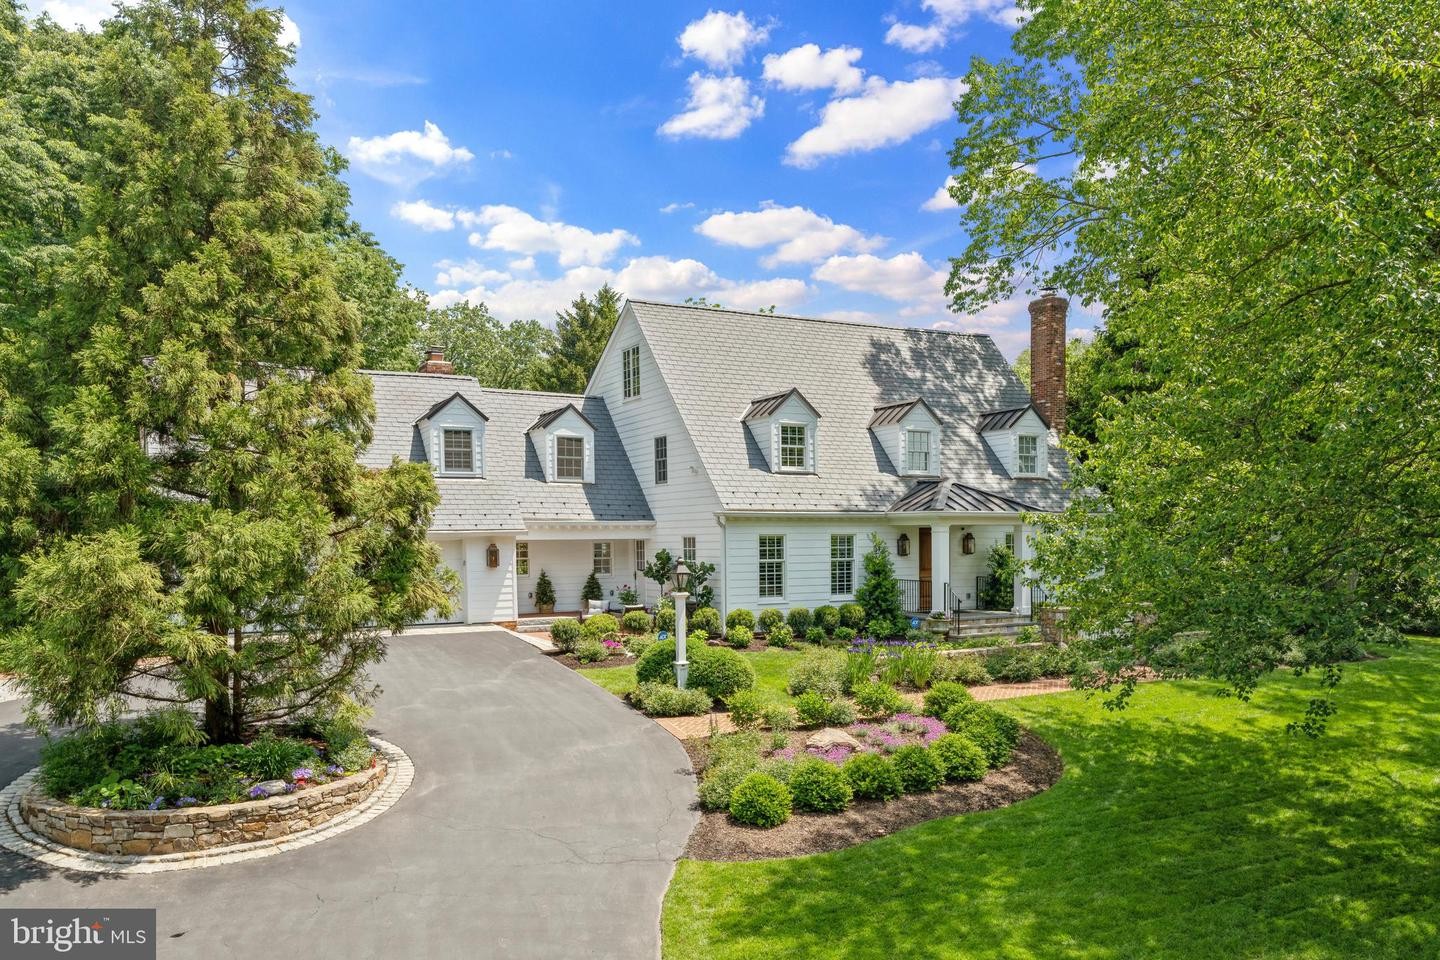 2. 903 Countryside Ct